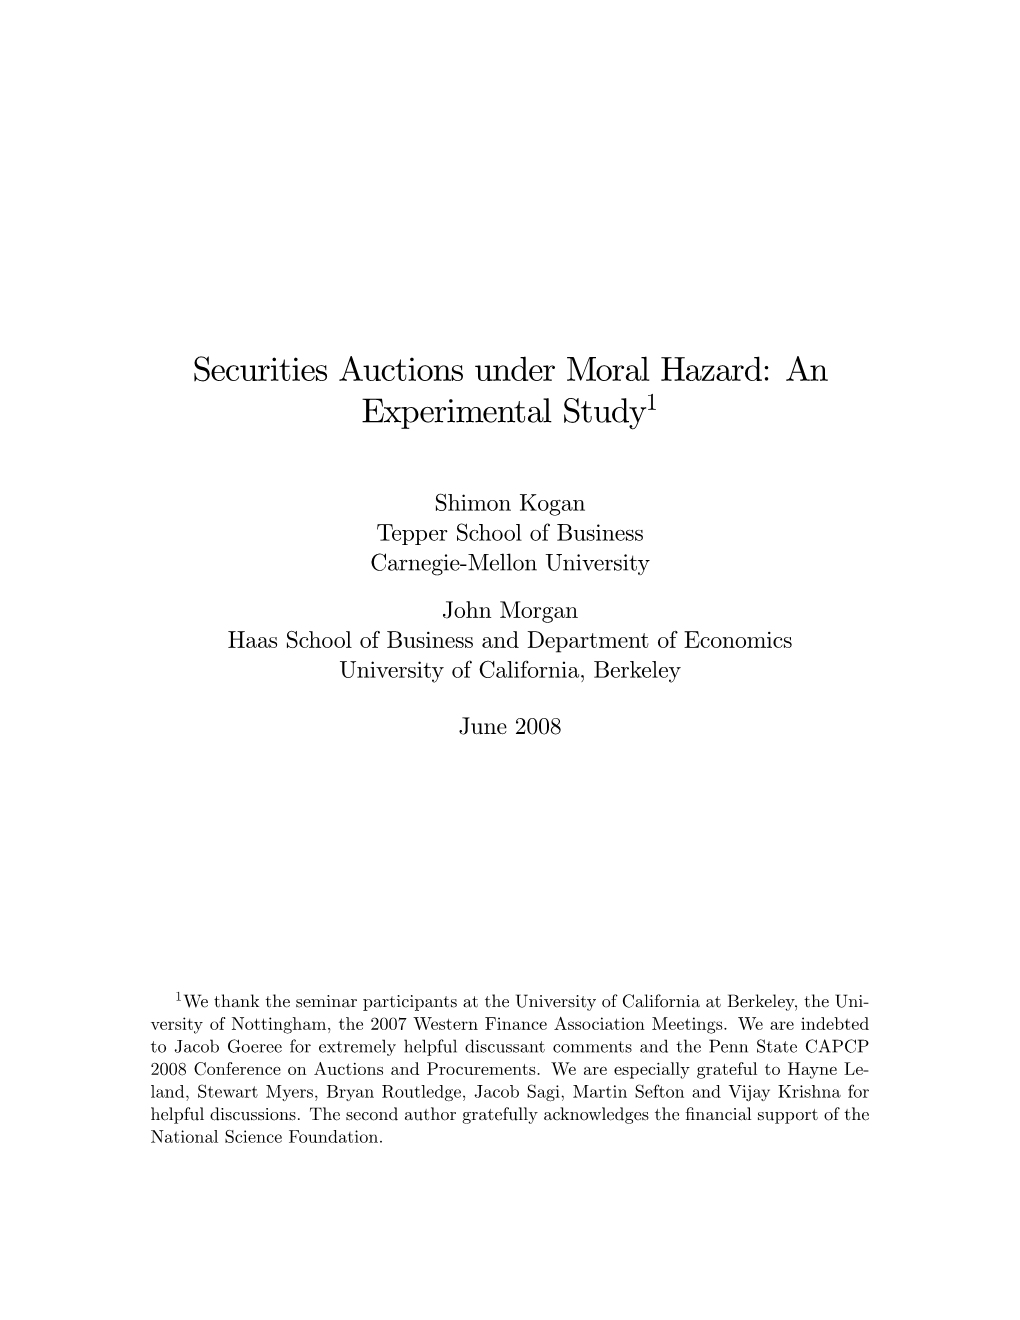 Securities Auctions Under Moral Hazard: an Experimental Study1